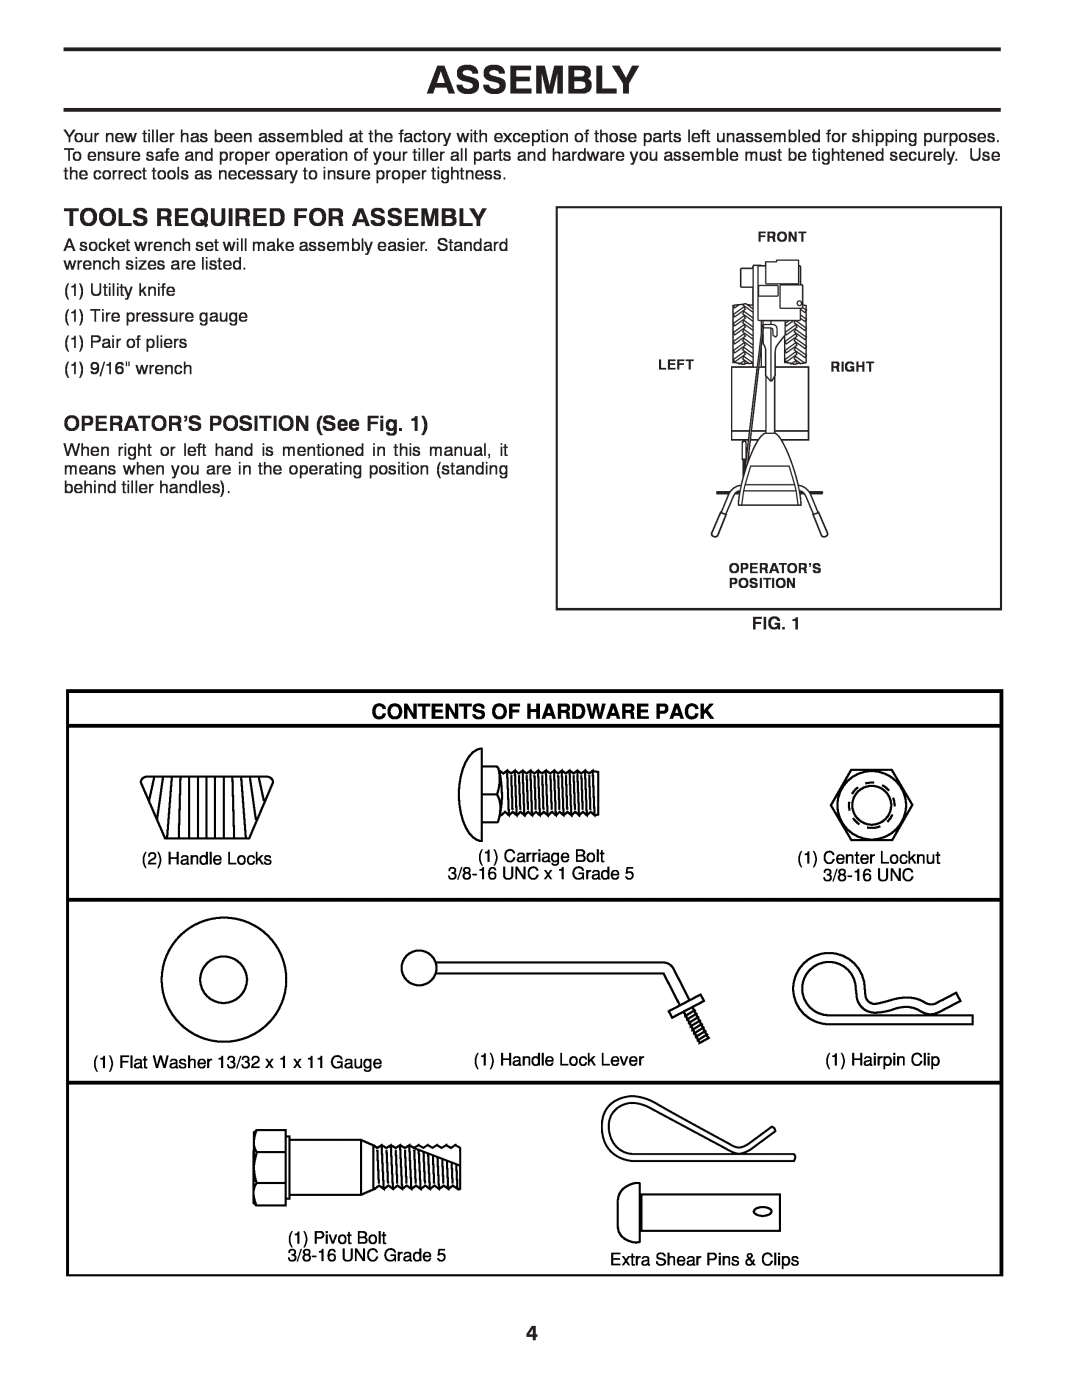 Husqvarna DRT70 owner manual Tools Required For Assembly, OPERATOR’S POSITION See Fig, Contents Of Hardware Pack 